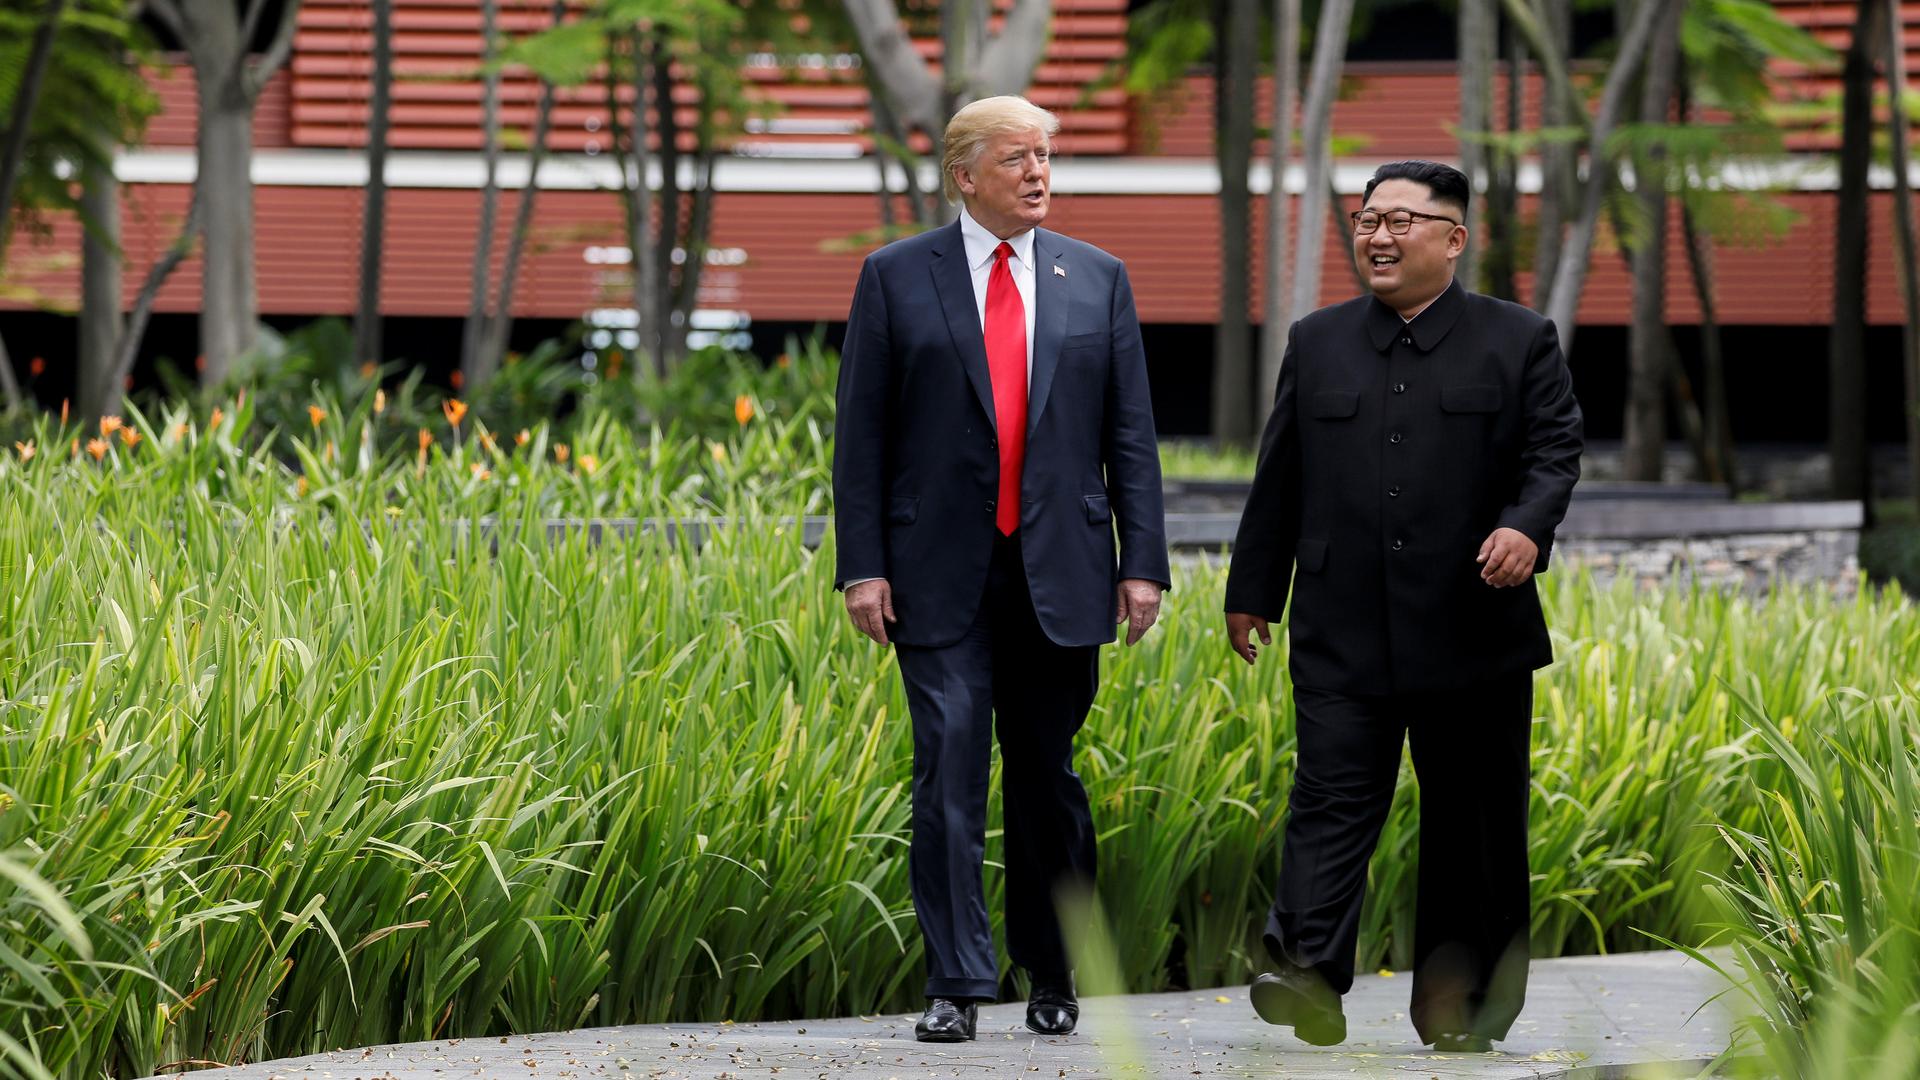 US President Donald Trump and North Korea's leader Kim Jong Un walk together before their working lunch during their summit at the Capella Hotel on the resort island of Sentosa, Singapore.